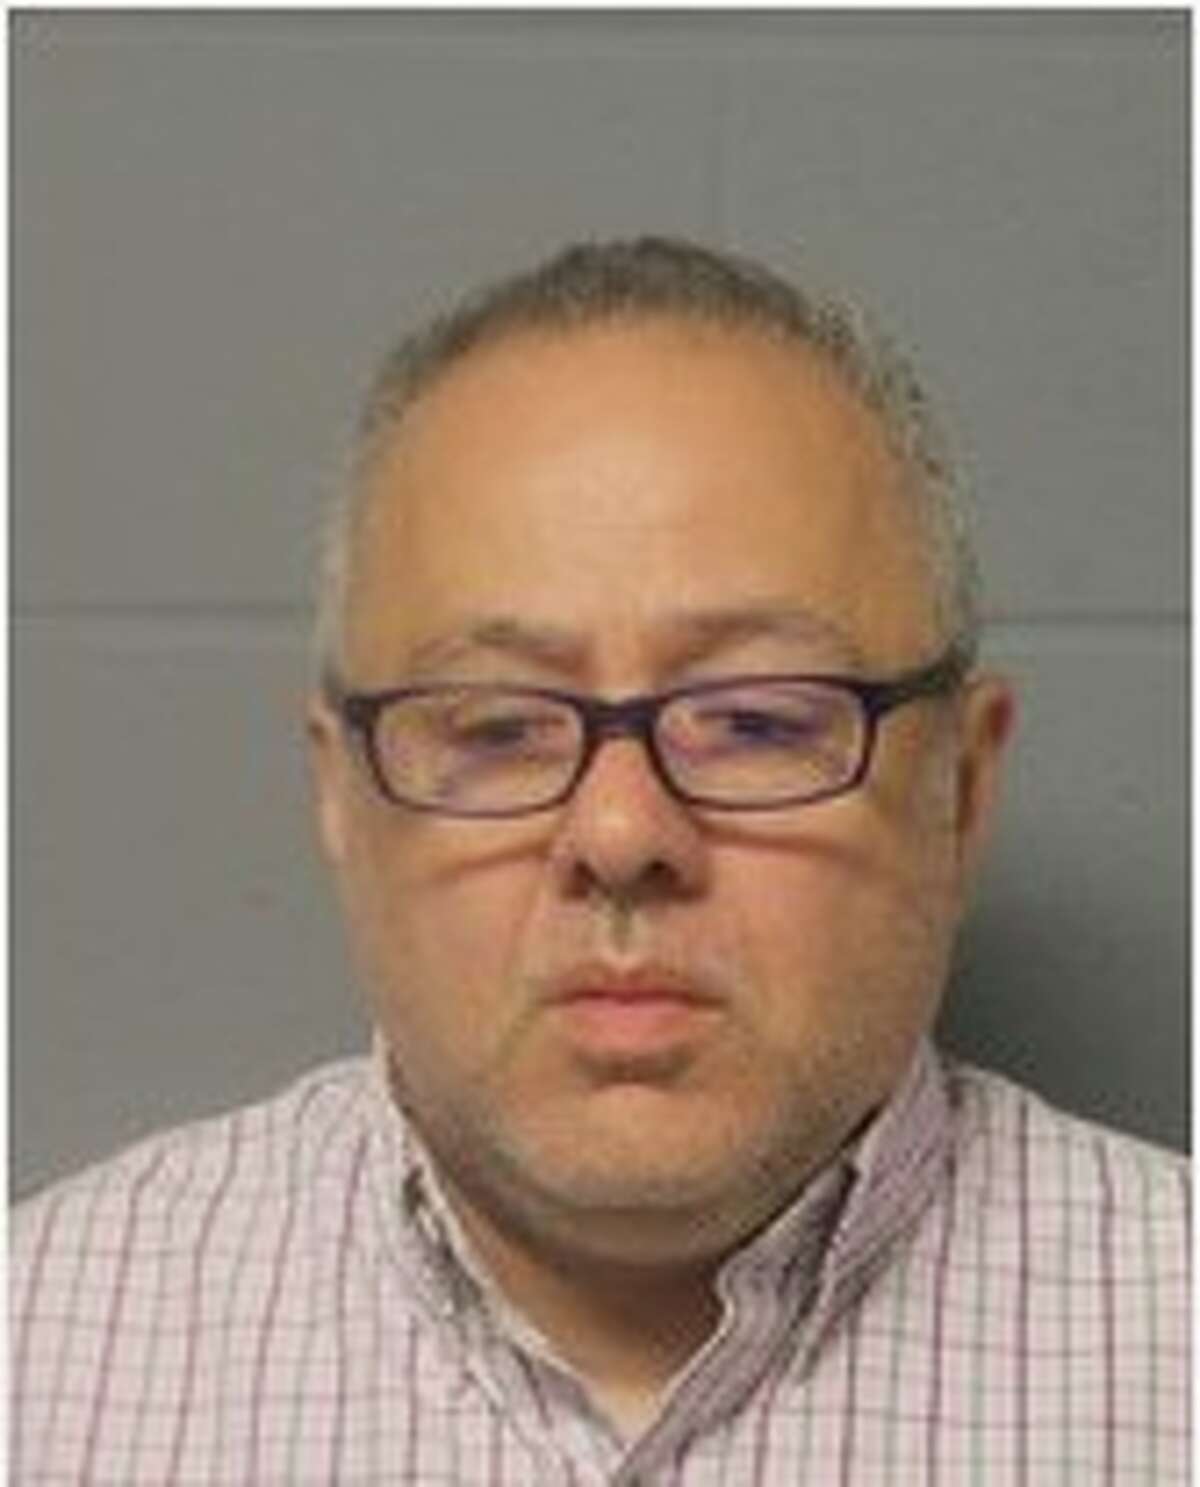 Ronald Iannucci Jr., 50, has been charged with 10 counts of second-degree sexual assault and 13 counts of risk of injury to a minor, according to the North Haven Police Department. 